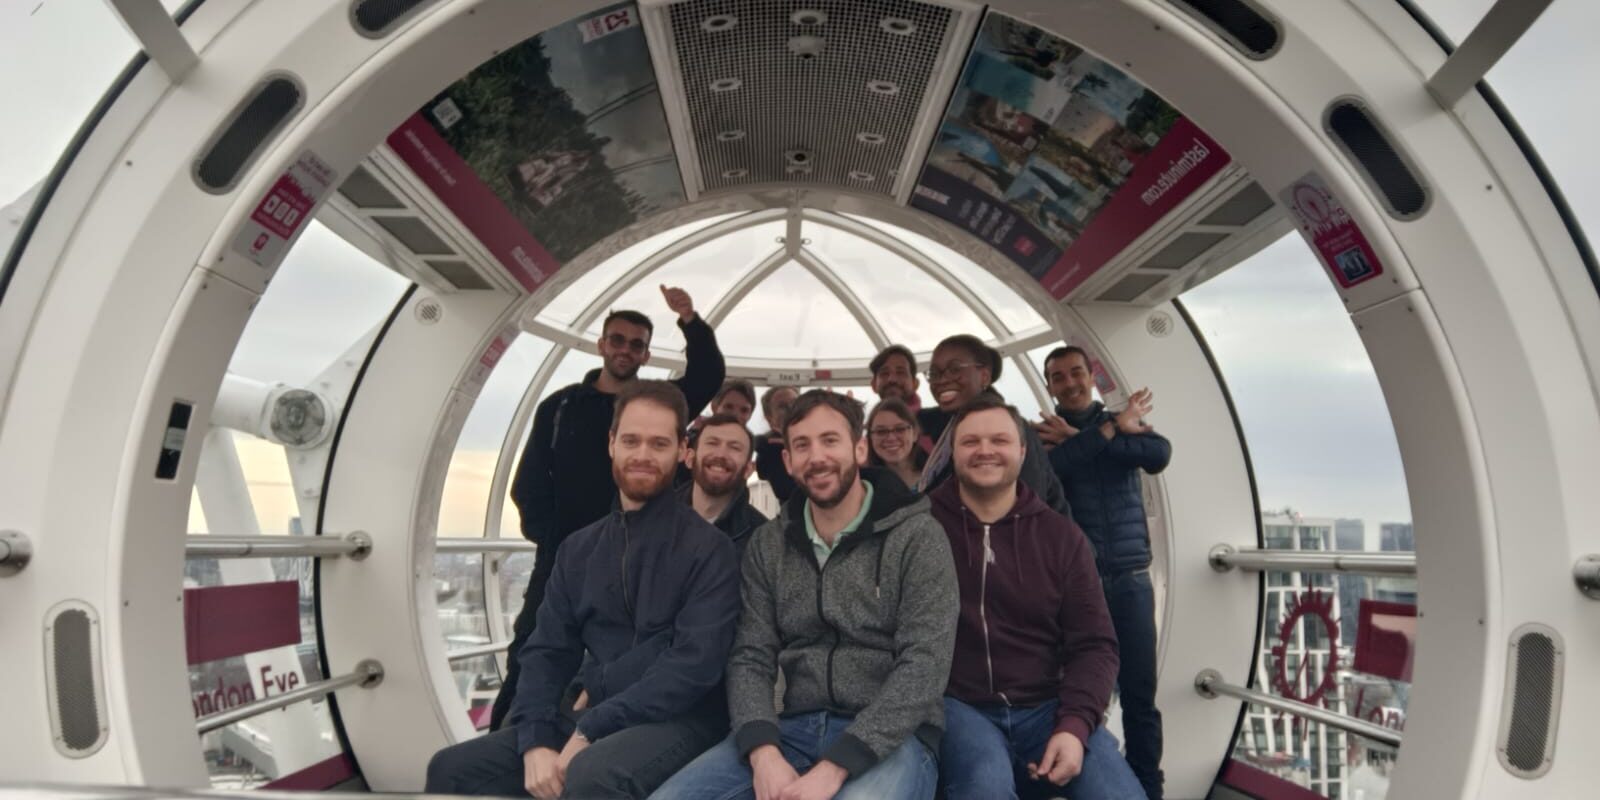 A group of people look at the camera inside the London Eye